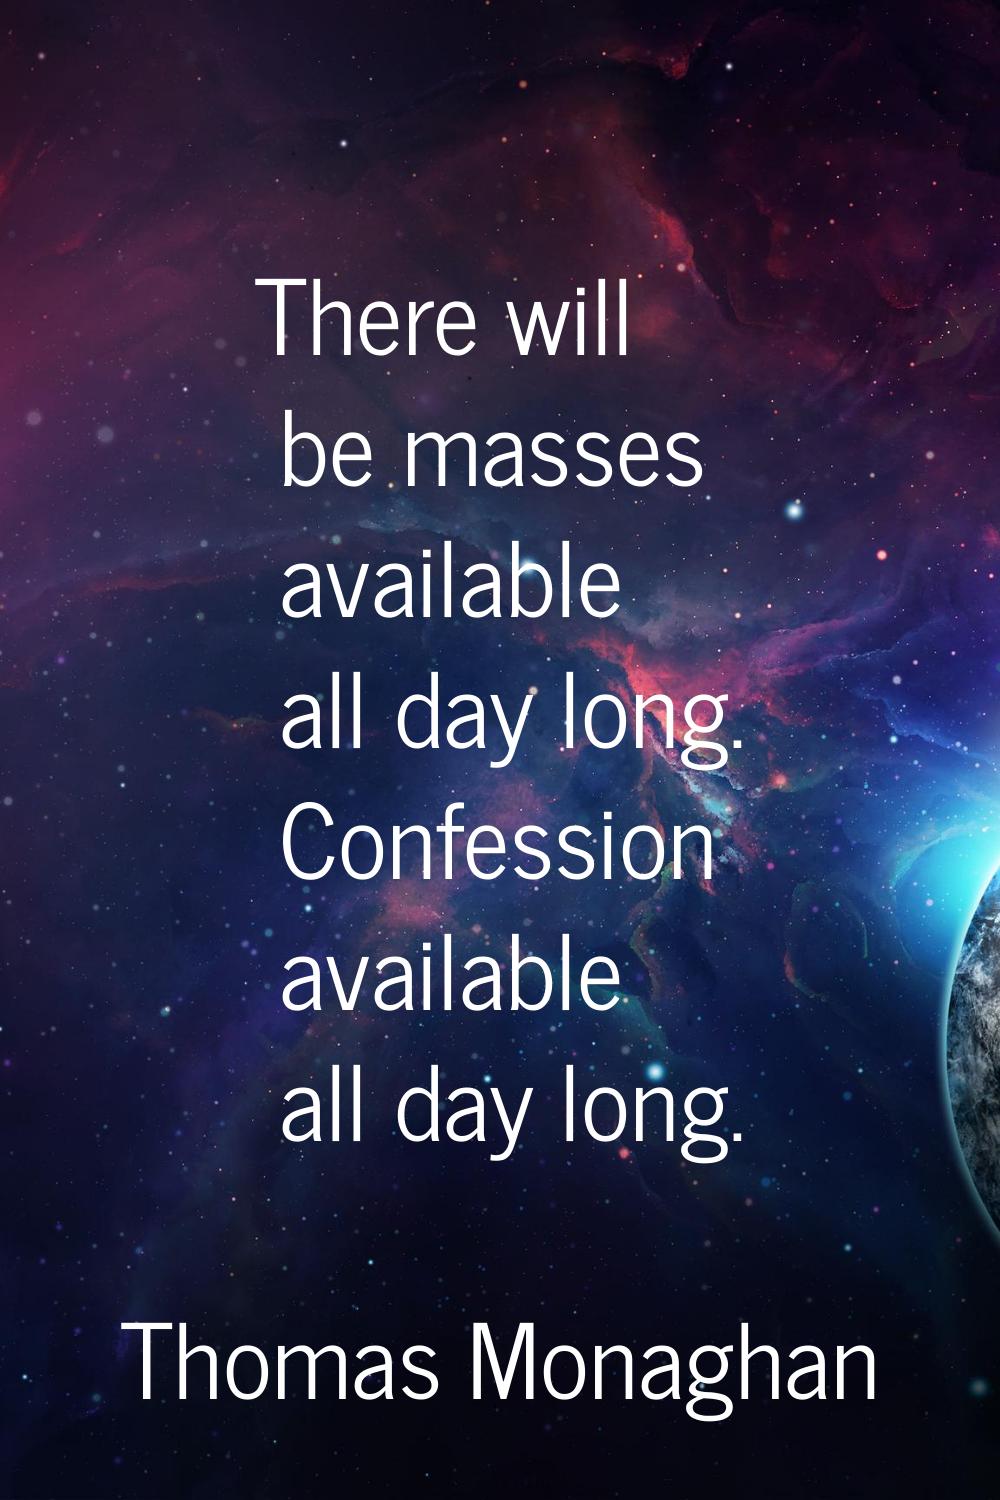 There will be masses available all day long. Confession available all day long.